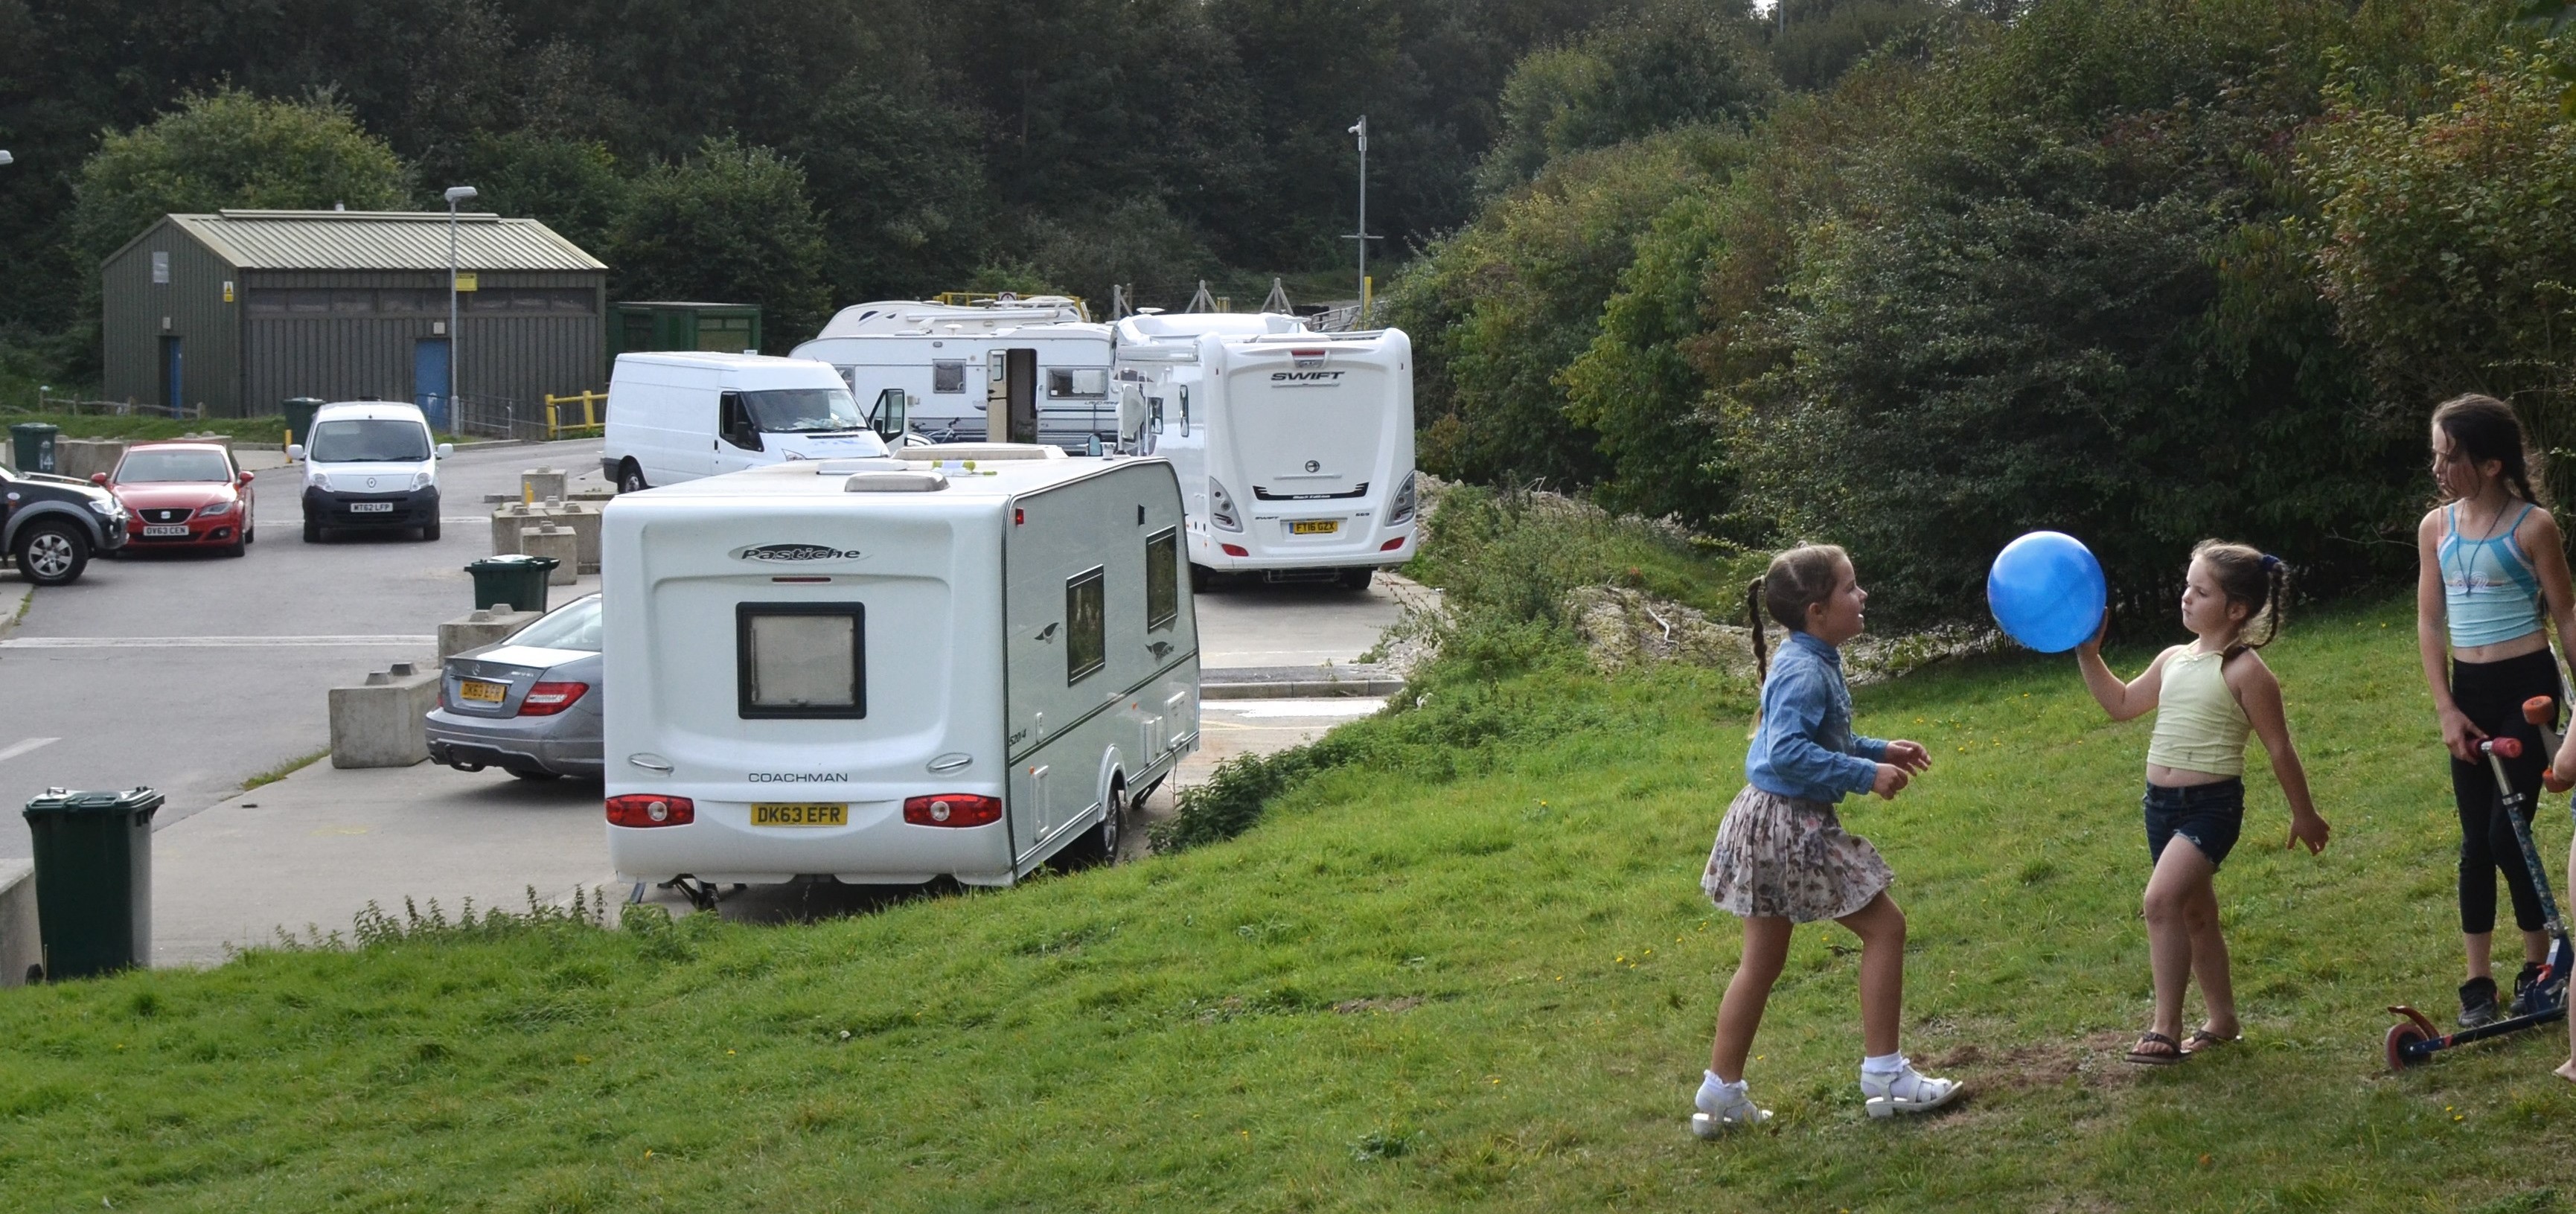 Girls playing on grass verge, next to trailers on a site